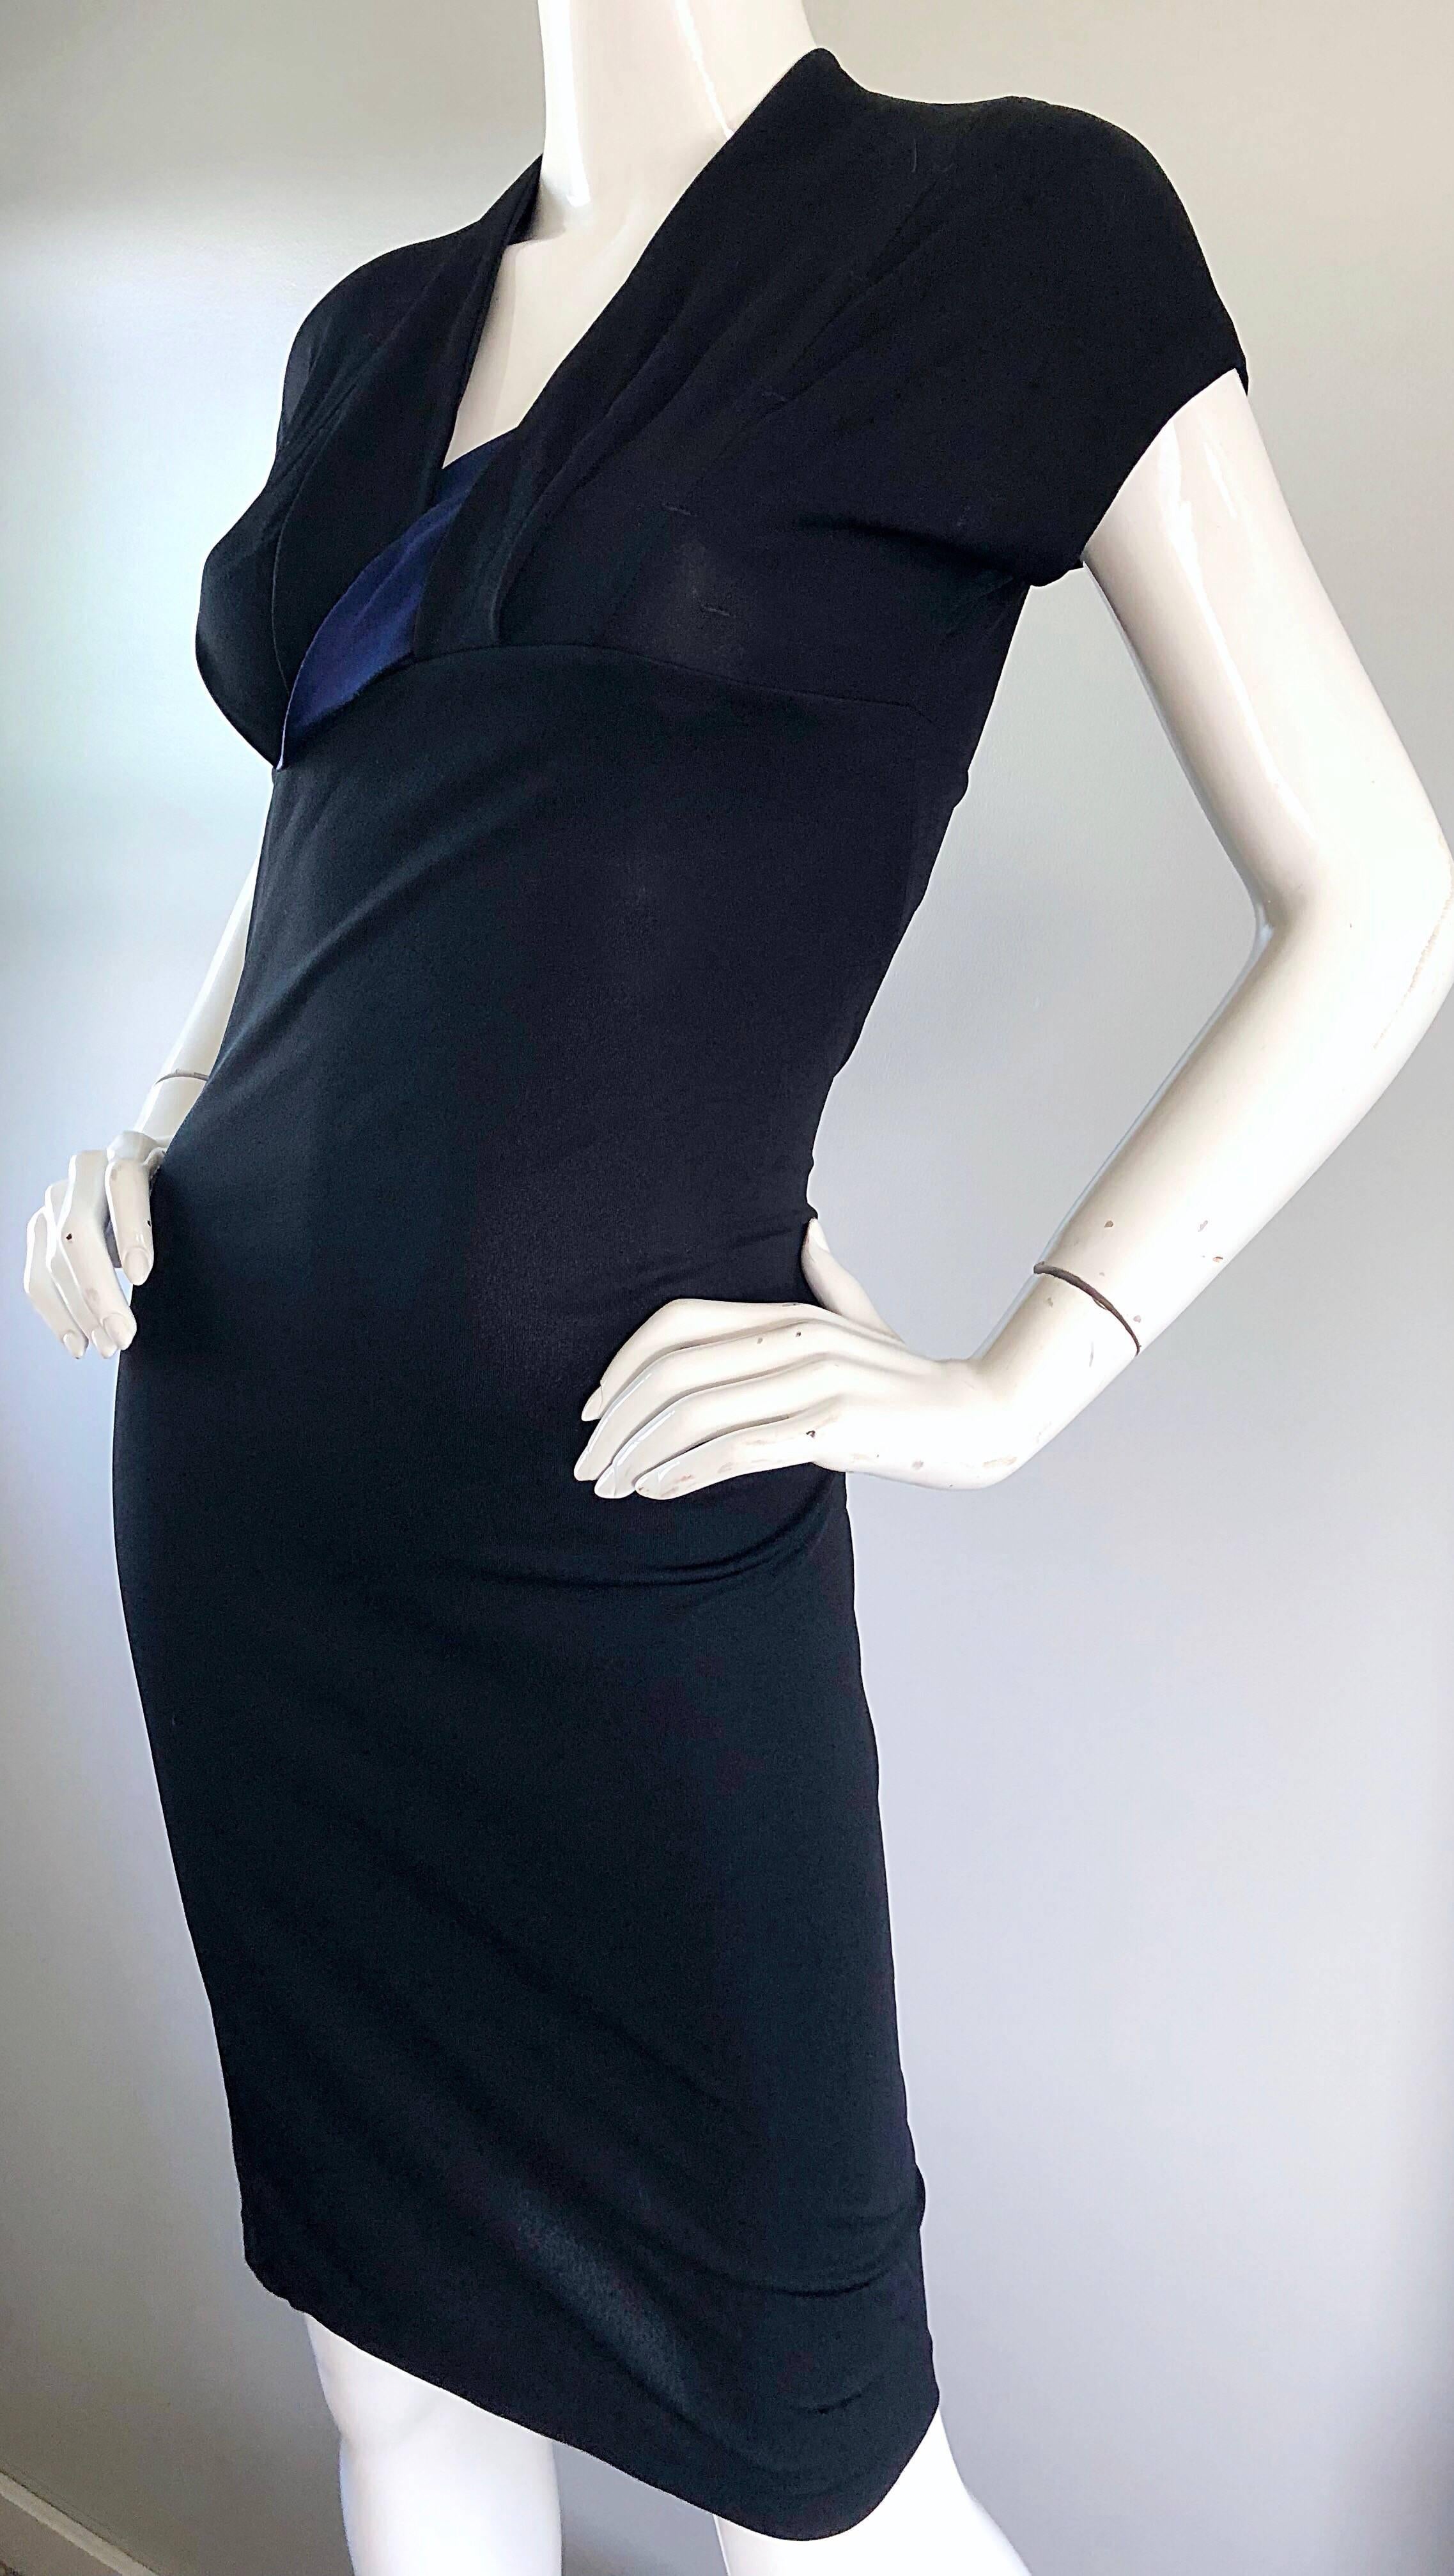 Vintage Salvatore Ferragamo 1990s Black and Navy Blue Jersey Dress Size 40 In Excellent Condition For Sale In San Diego, CA